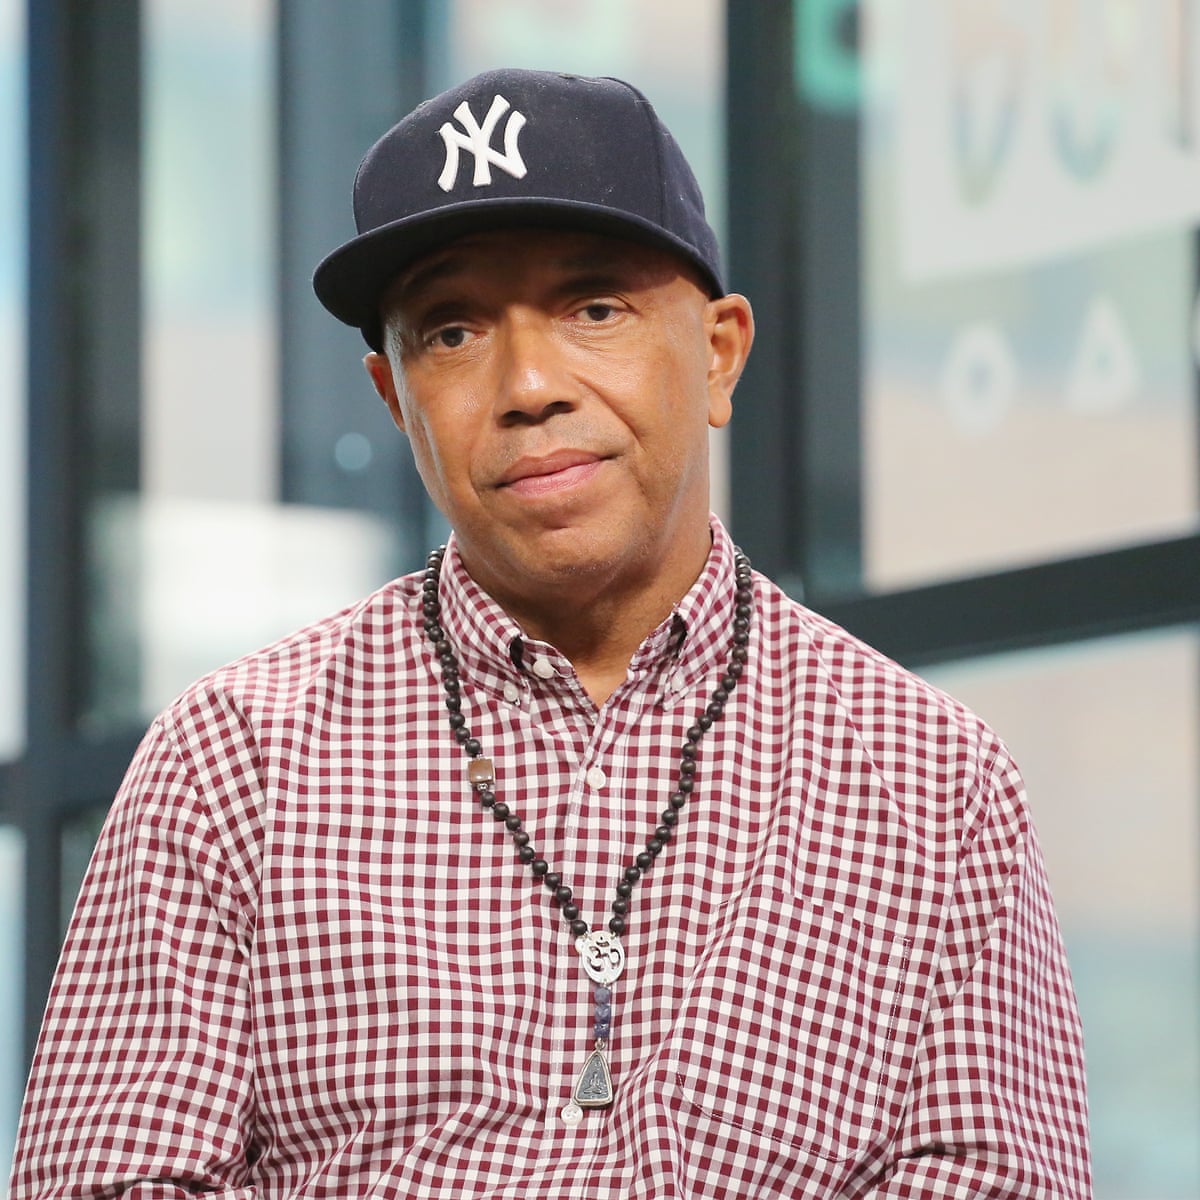 Russell Simmons Profile Image ( Source: The Guardian)